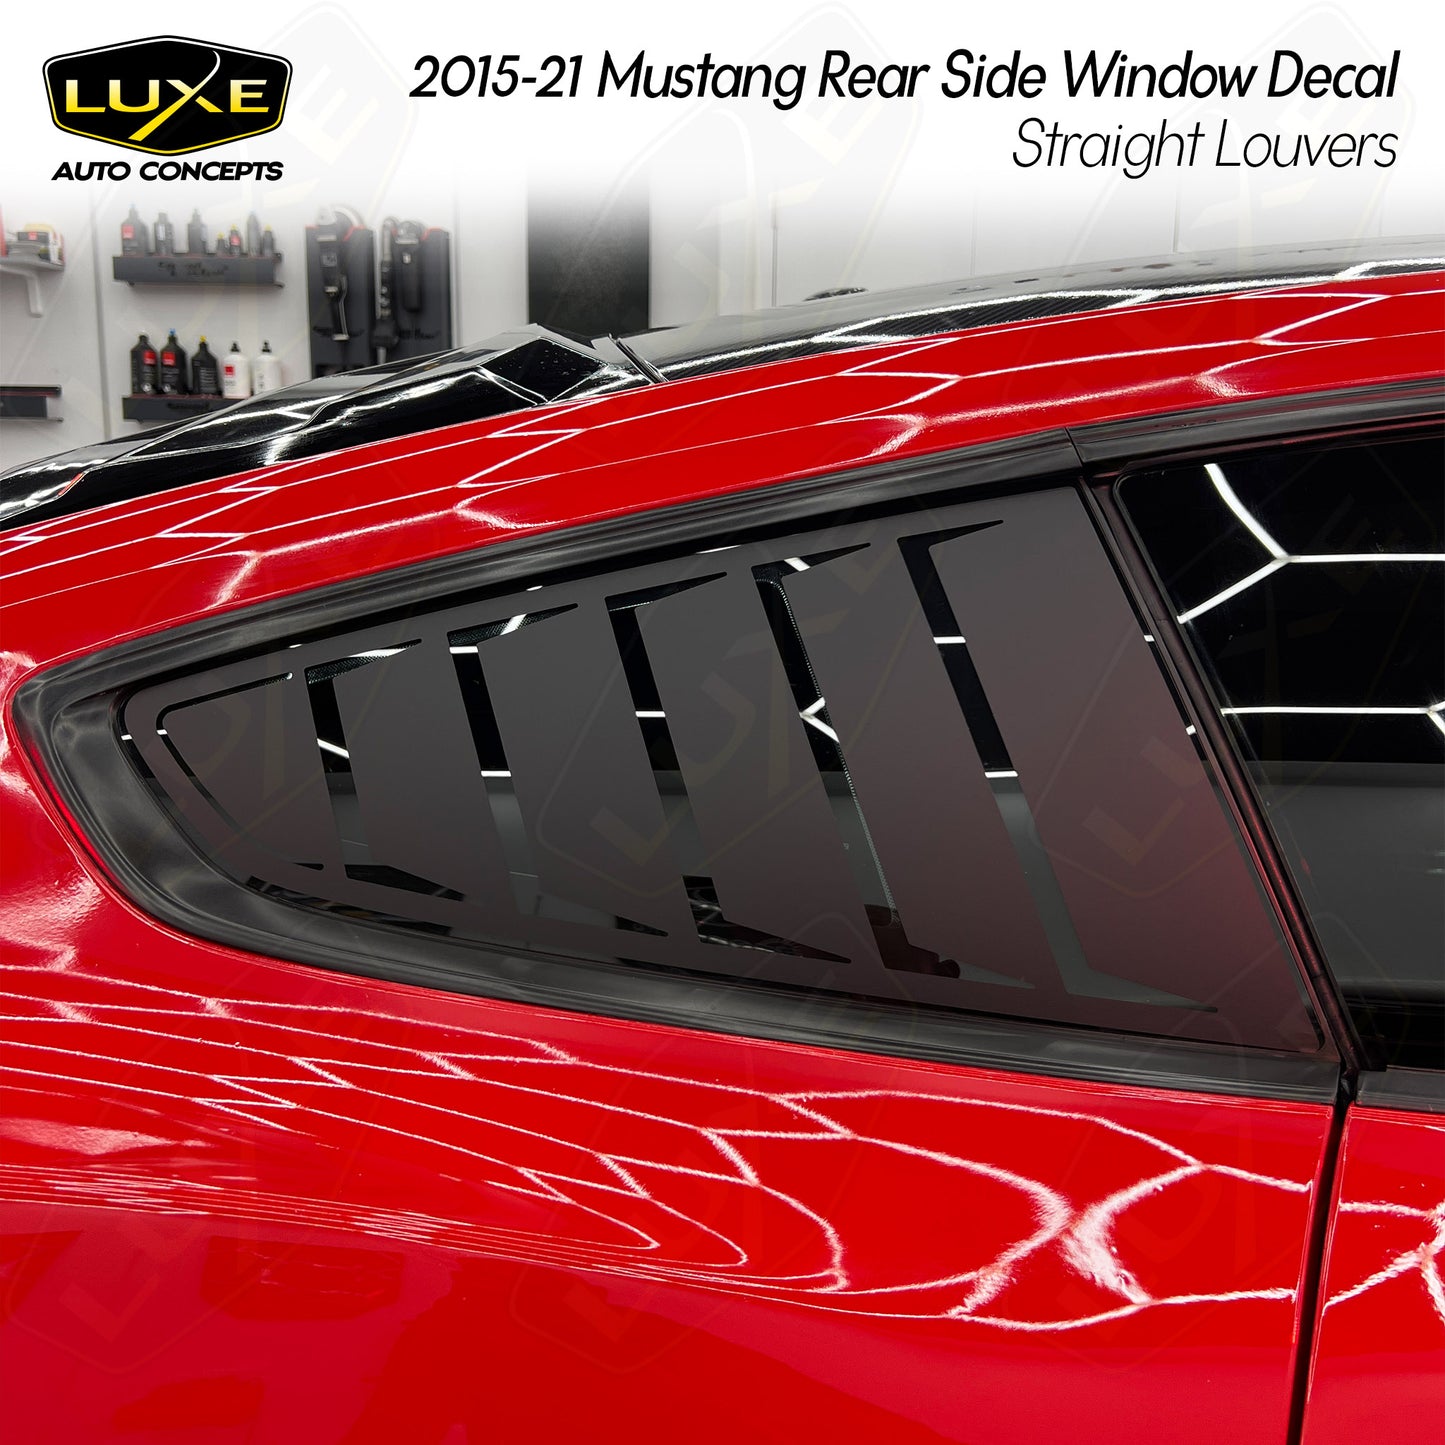 2015+ Mustang Rear Window Decal - Straight Louvers